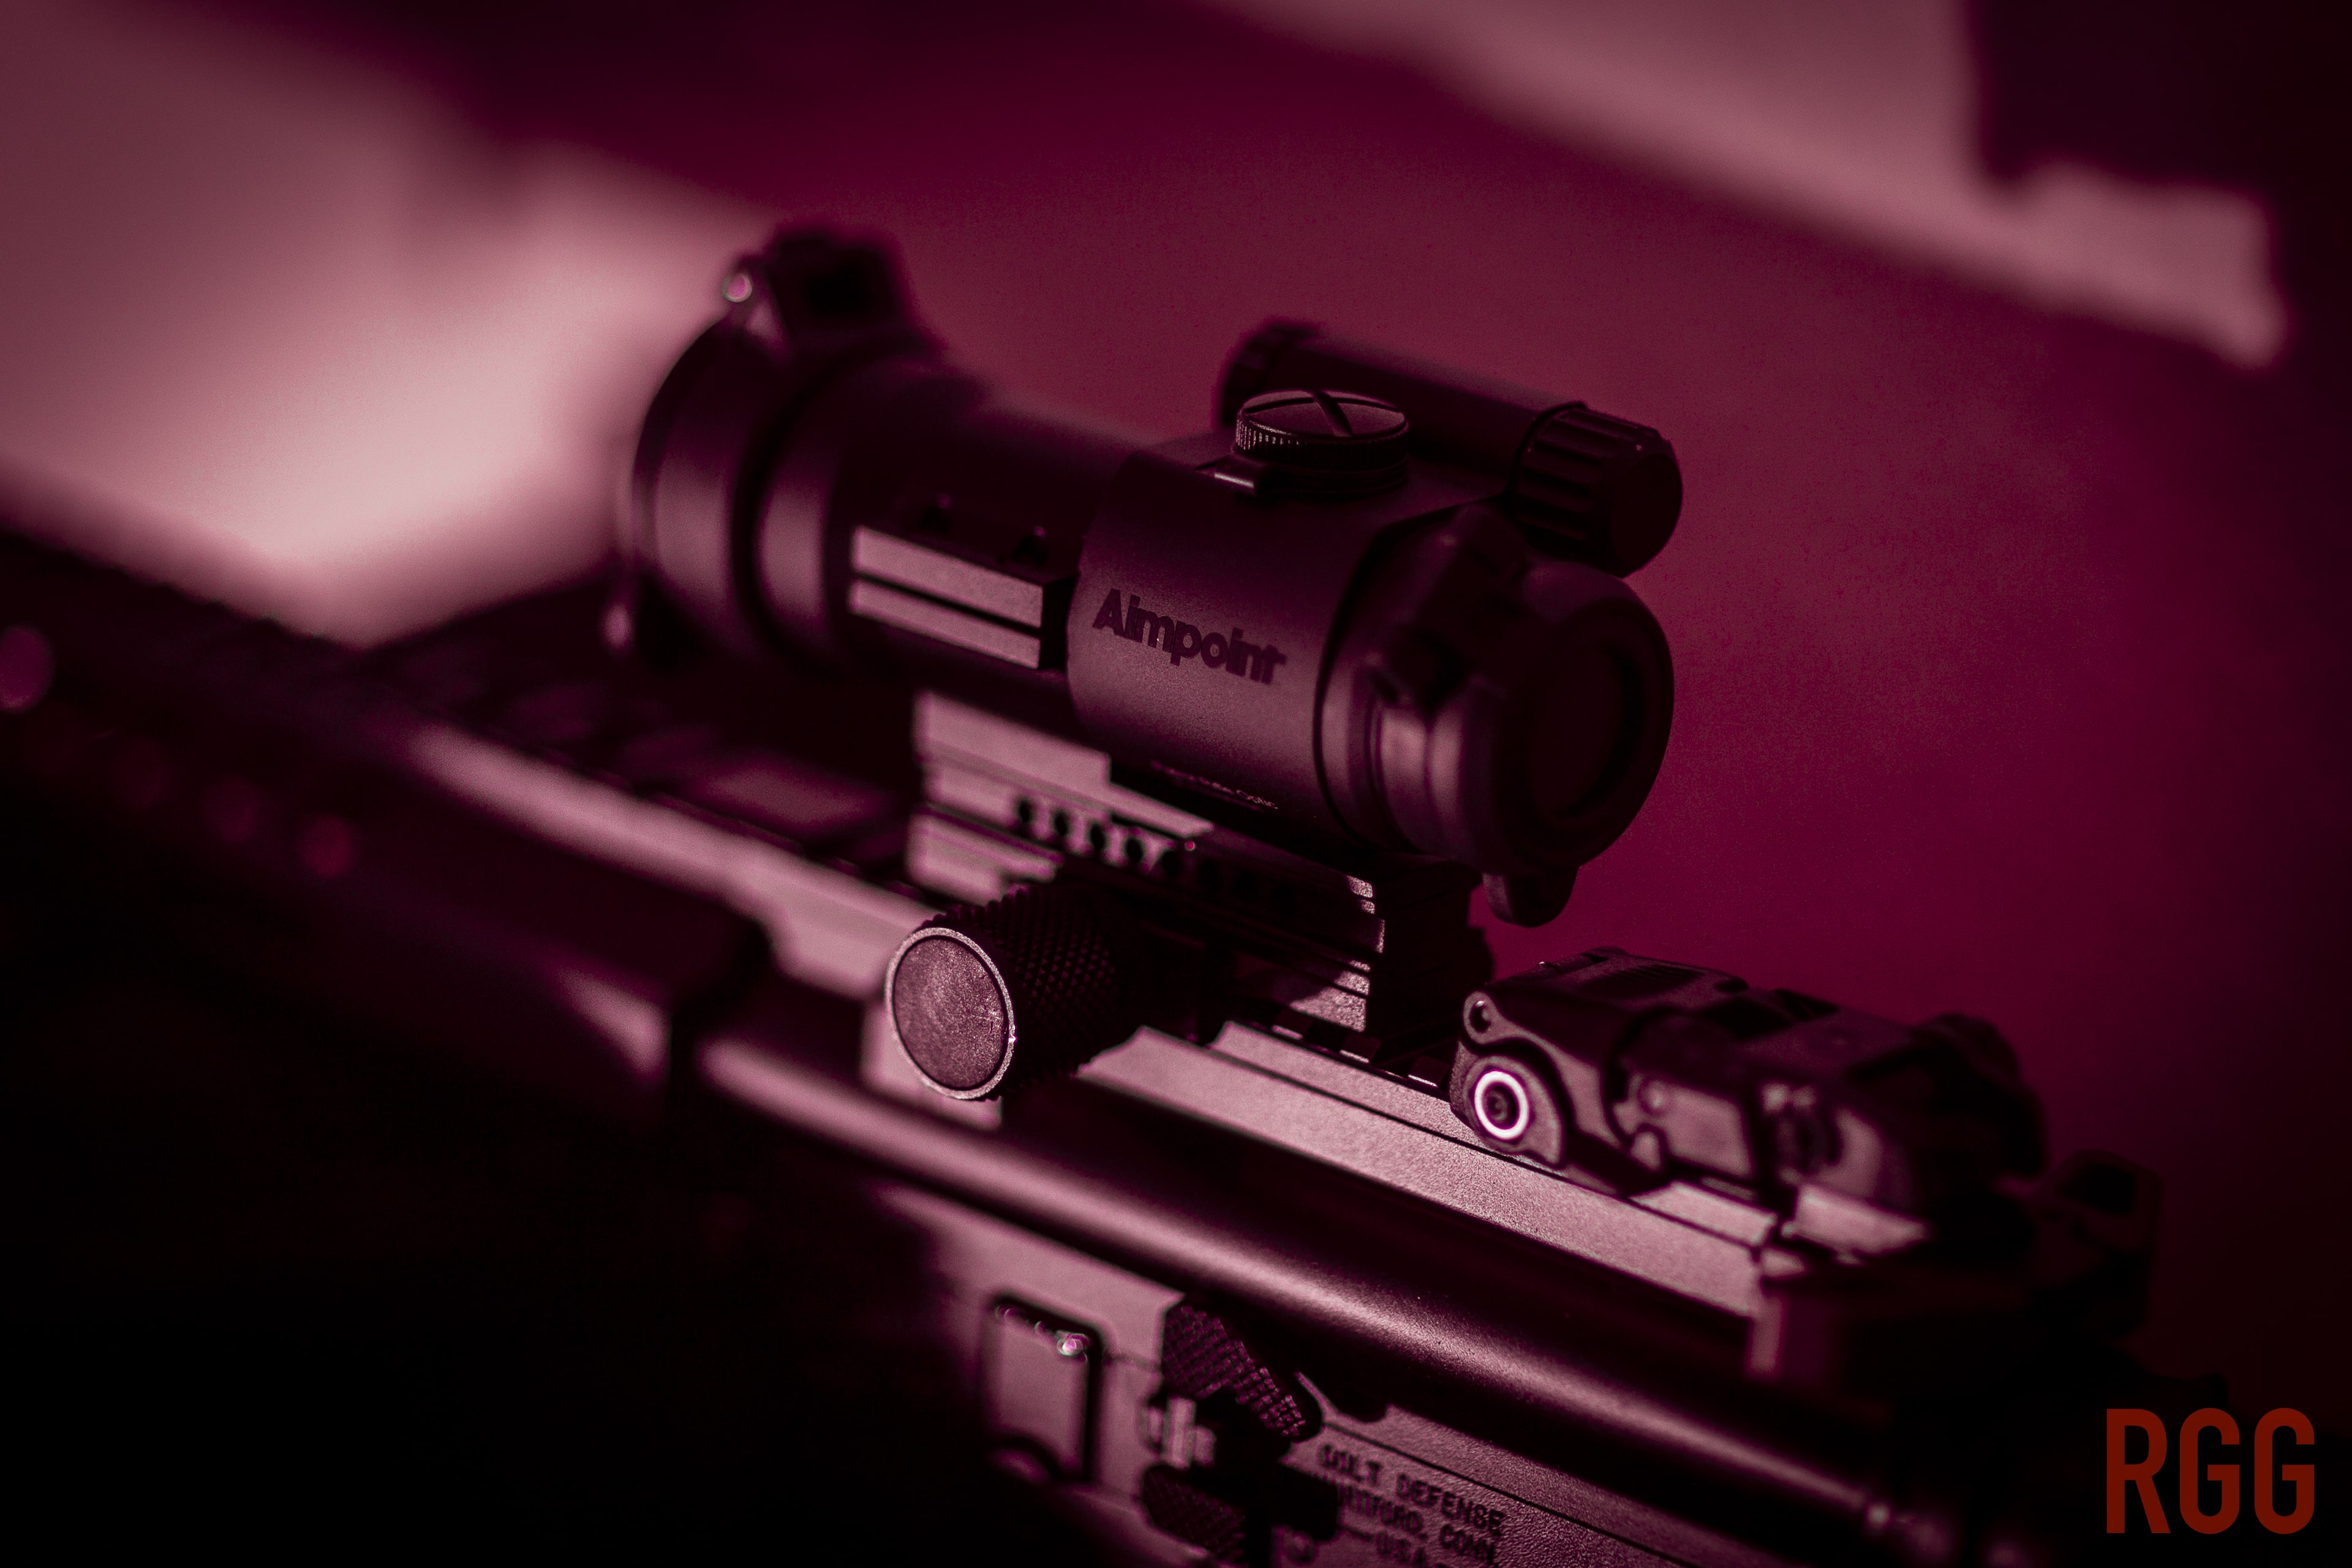 An Aimpoint PRO red dot sight Nothing to do with the article. Just thought it looked cool when I photographed it.